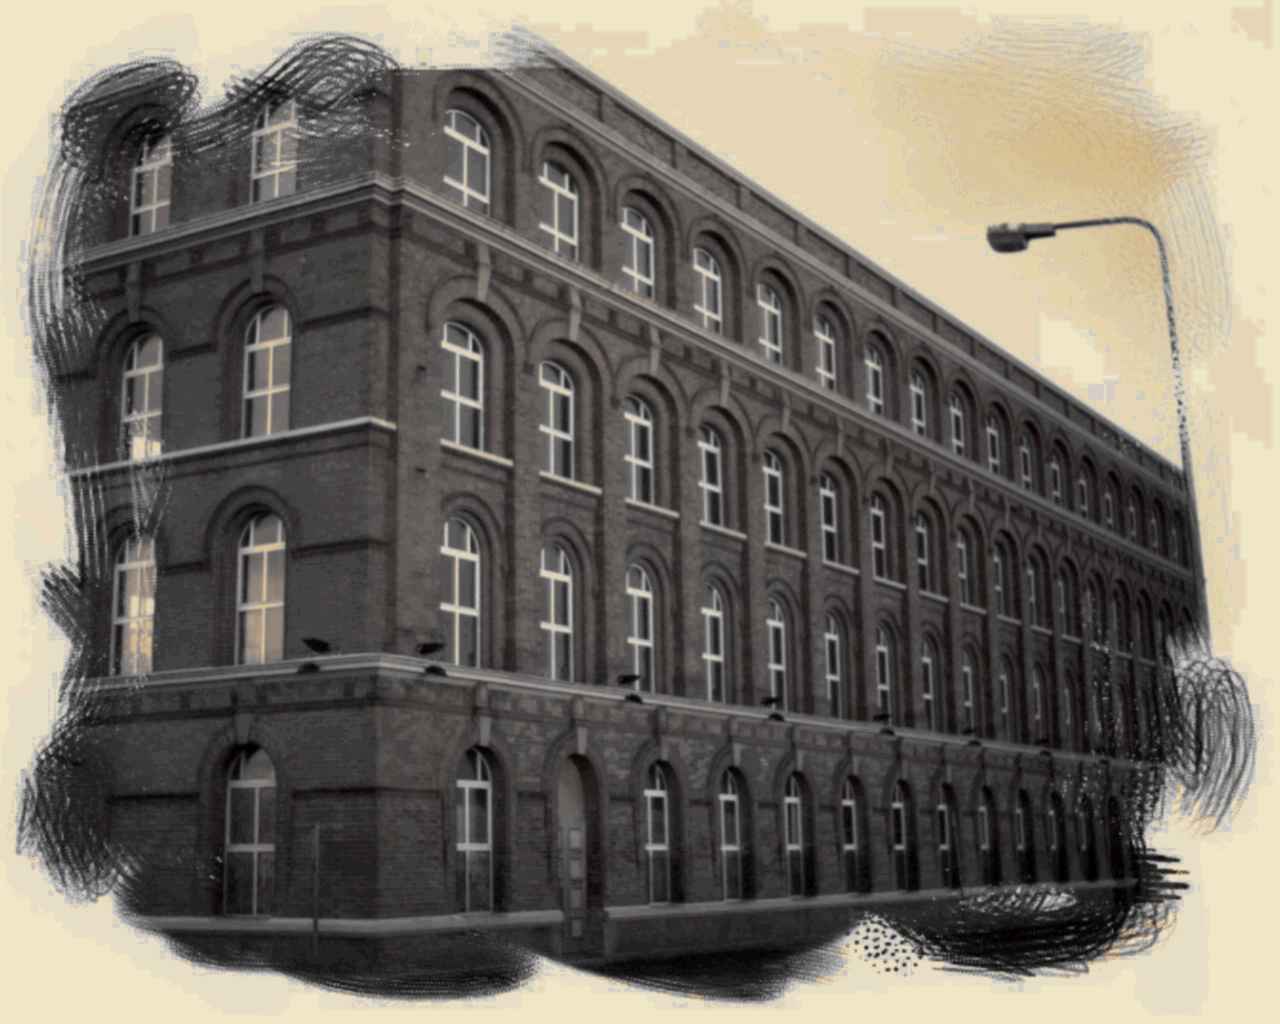 This is a picture of the old Rosemount factory.